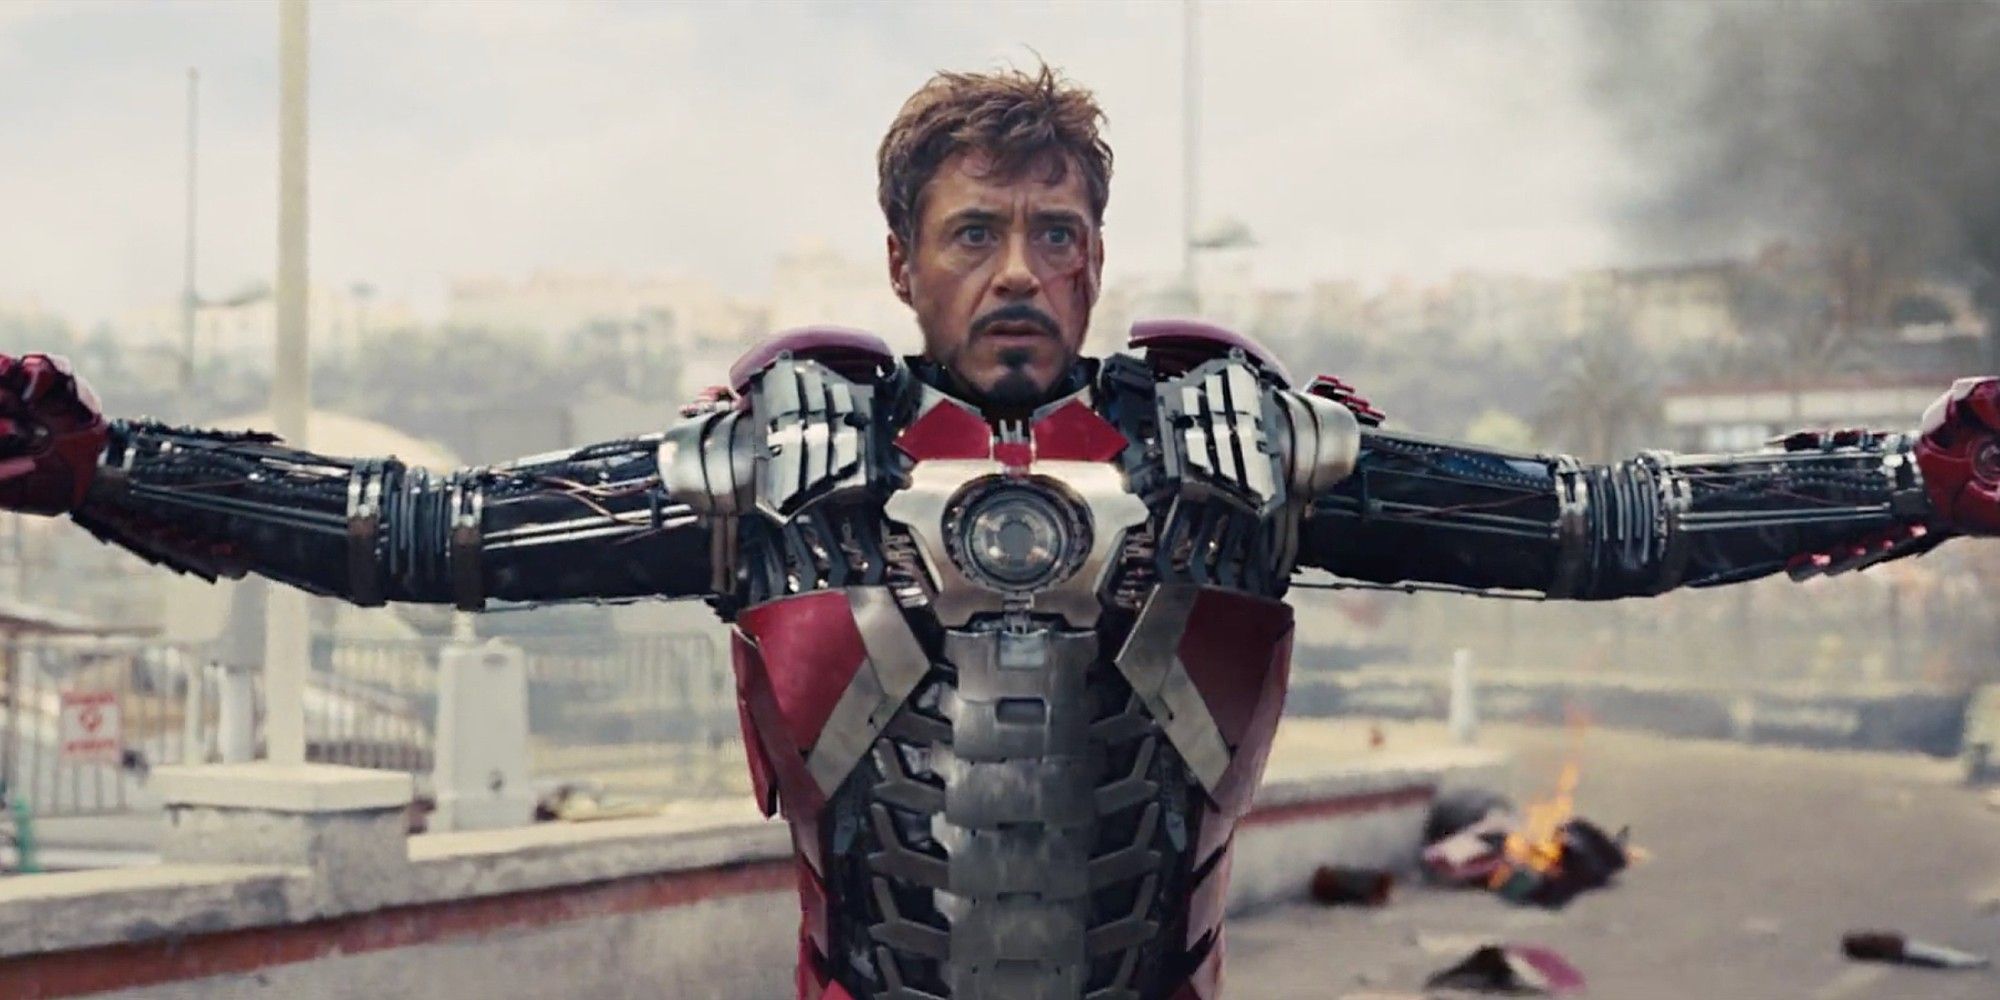 Marvel's Avengers Adds Another MCU Skin With Iron Man 2's Suitcase Armor